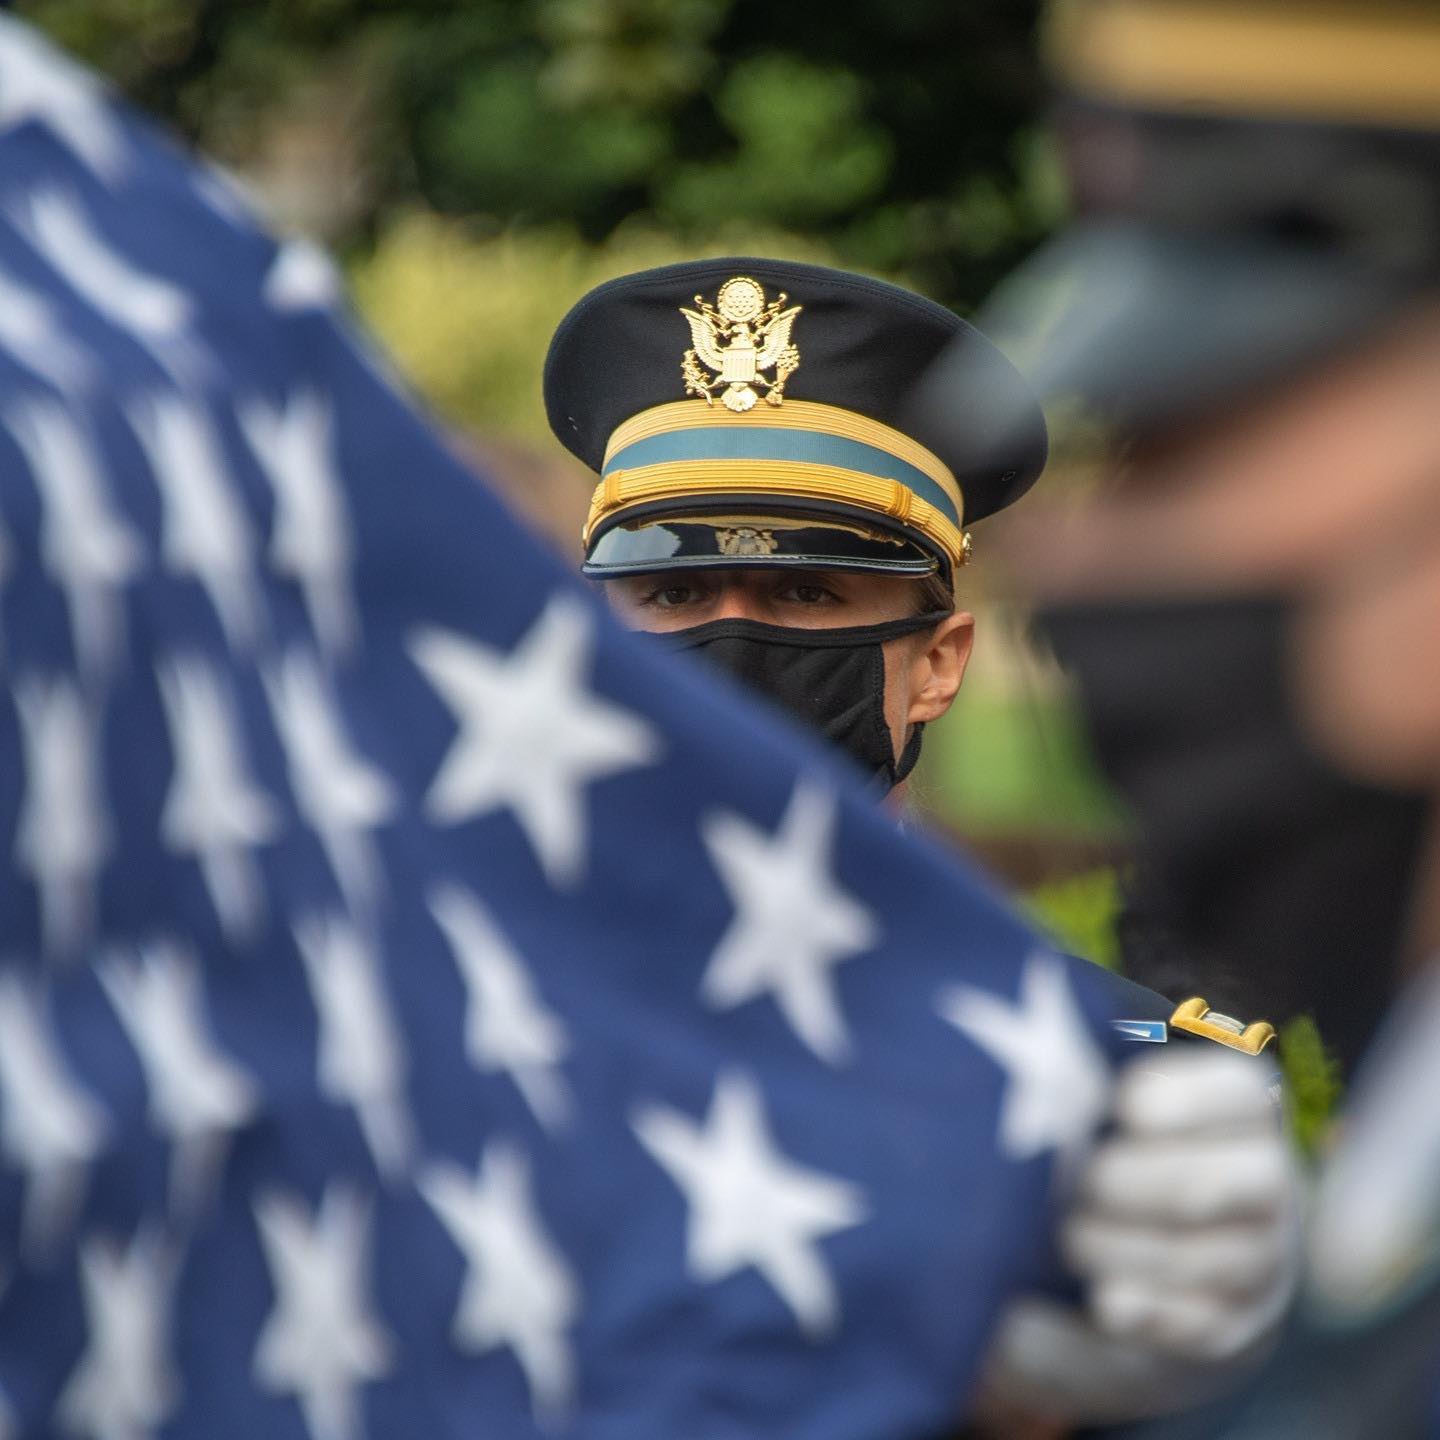 "In life, they honored the flag.  In death, this flag will honor them".

- U.S. Air Force Chaplain, Arlington National Cemetery 
Arlington, Virginia